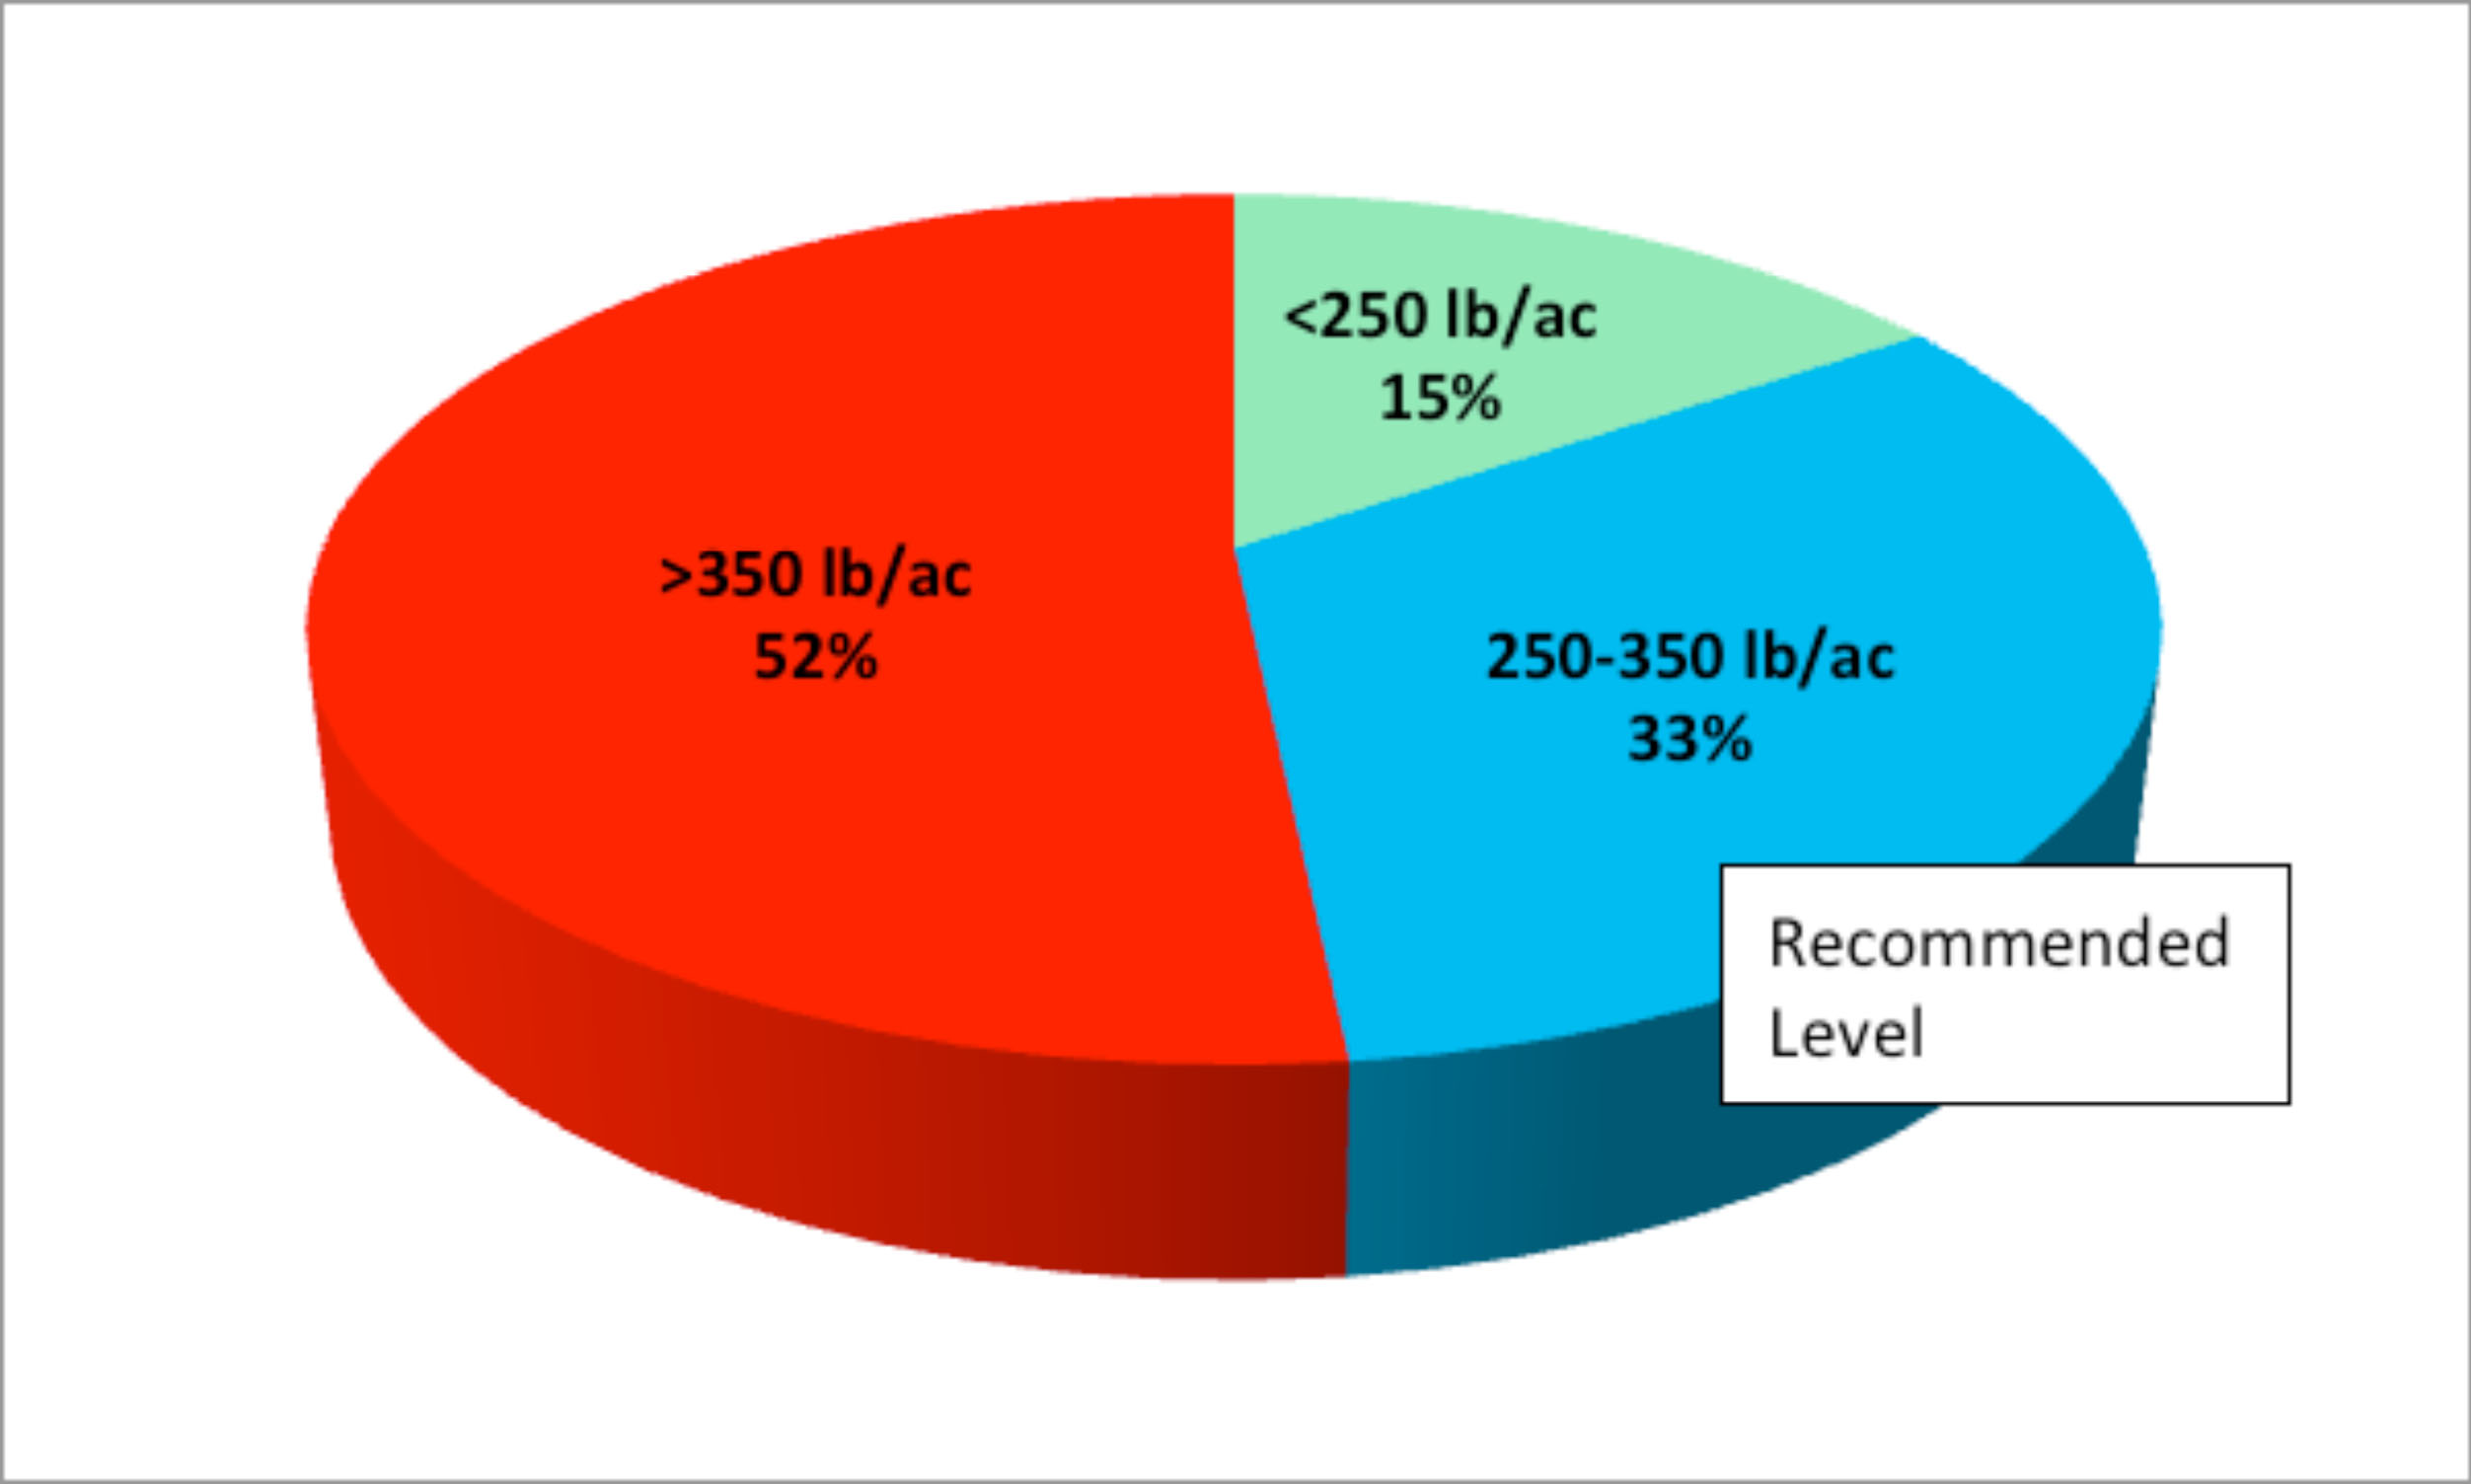 A pie chart of the Soil Test K distribution and the recommended level of K being at 250-350 lb/ac.